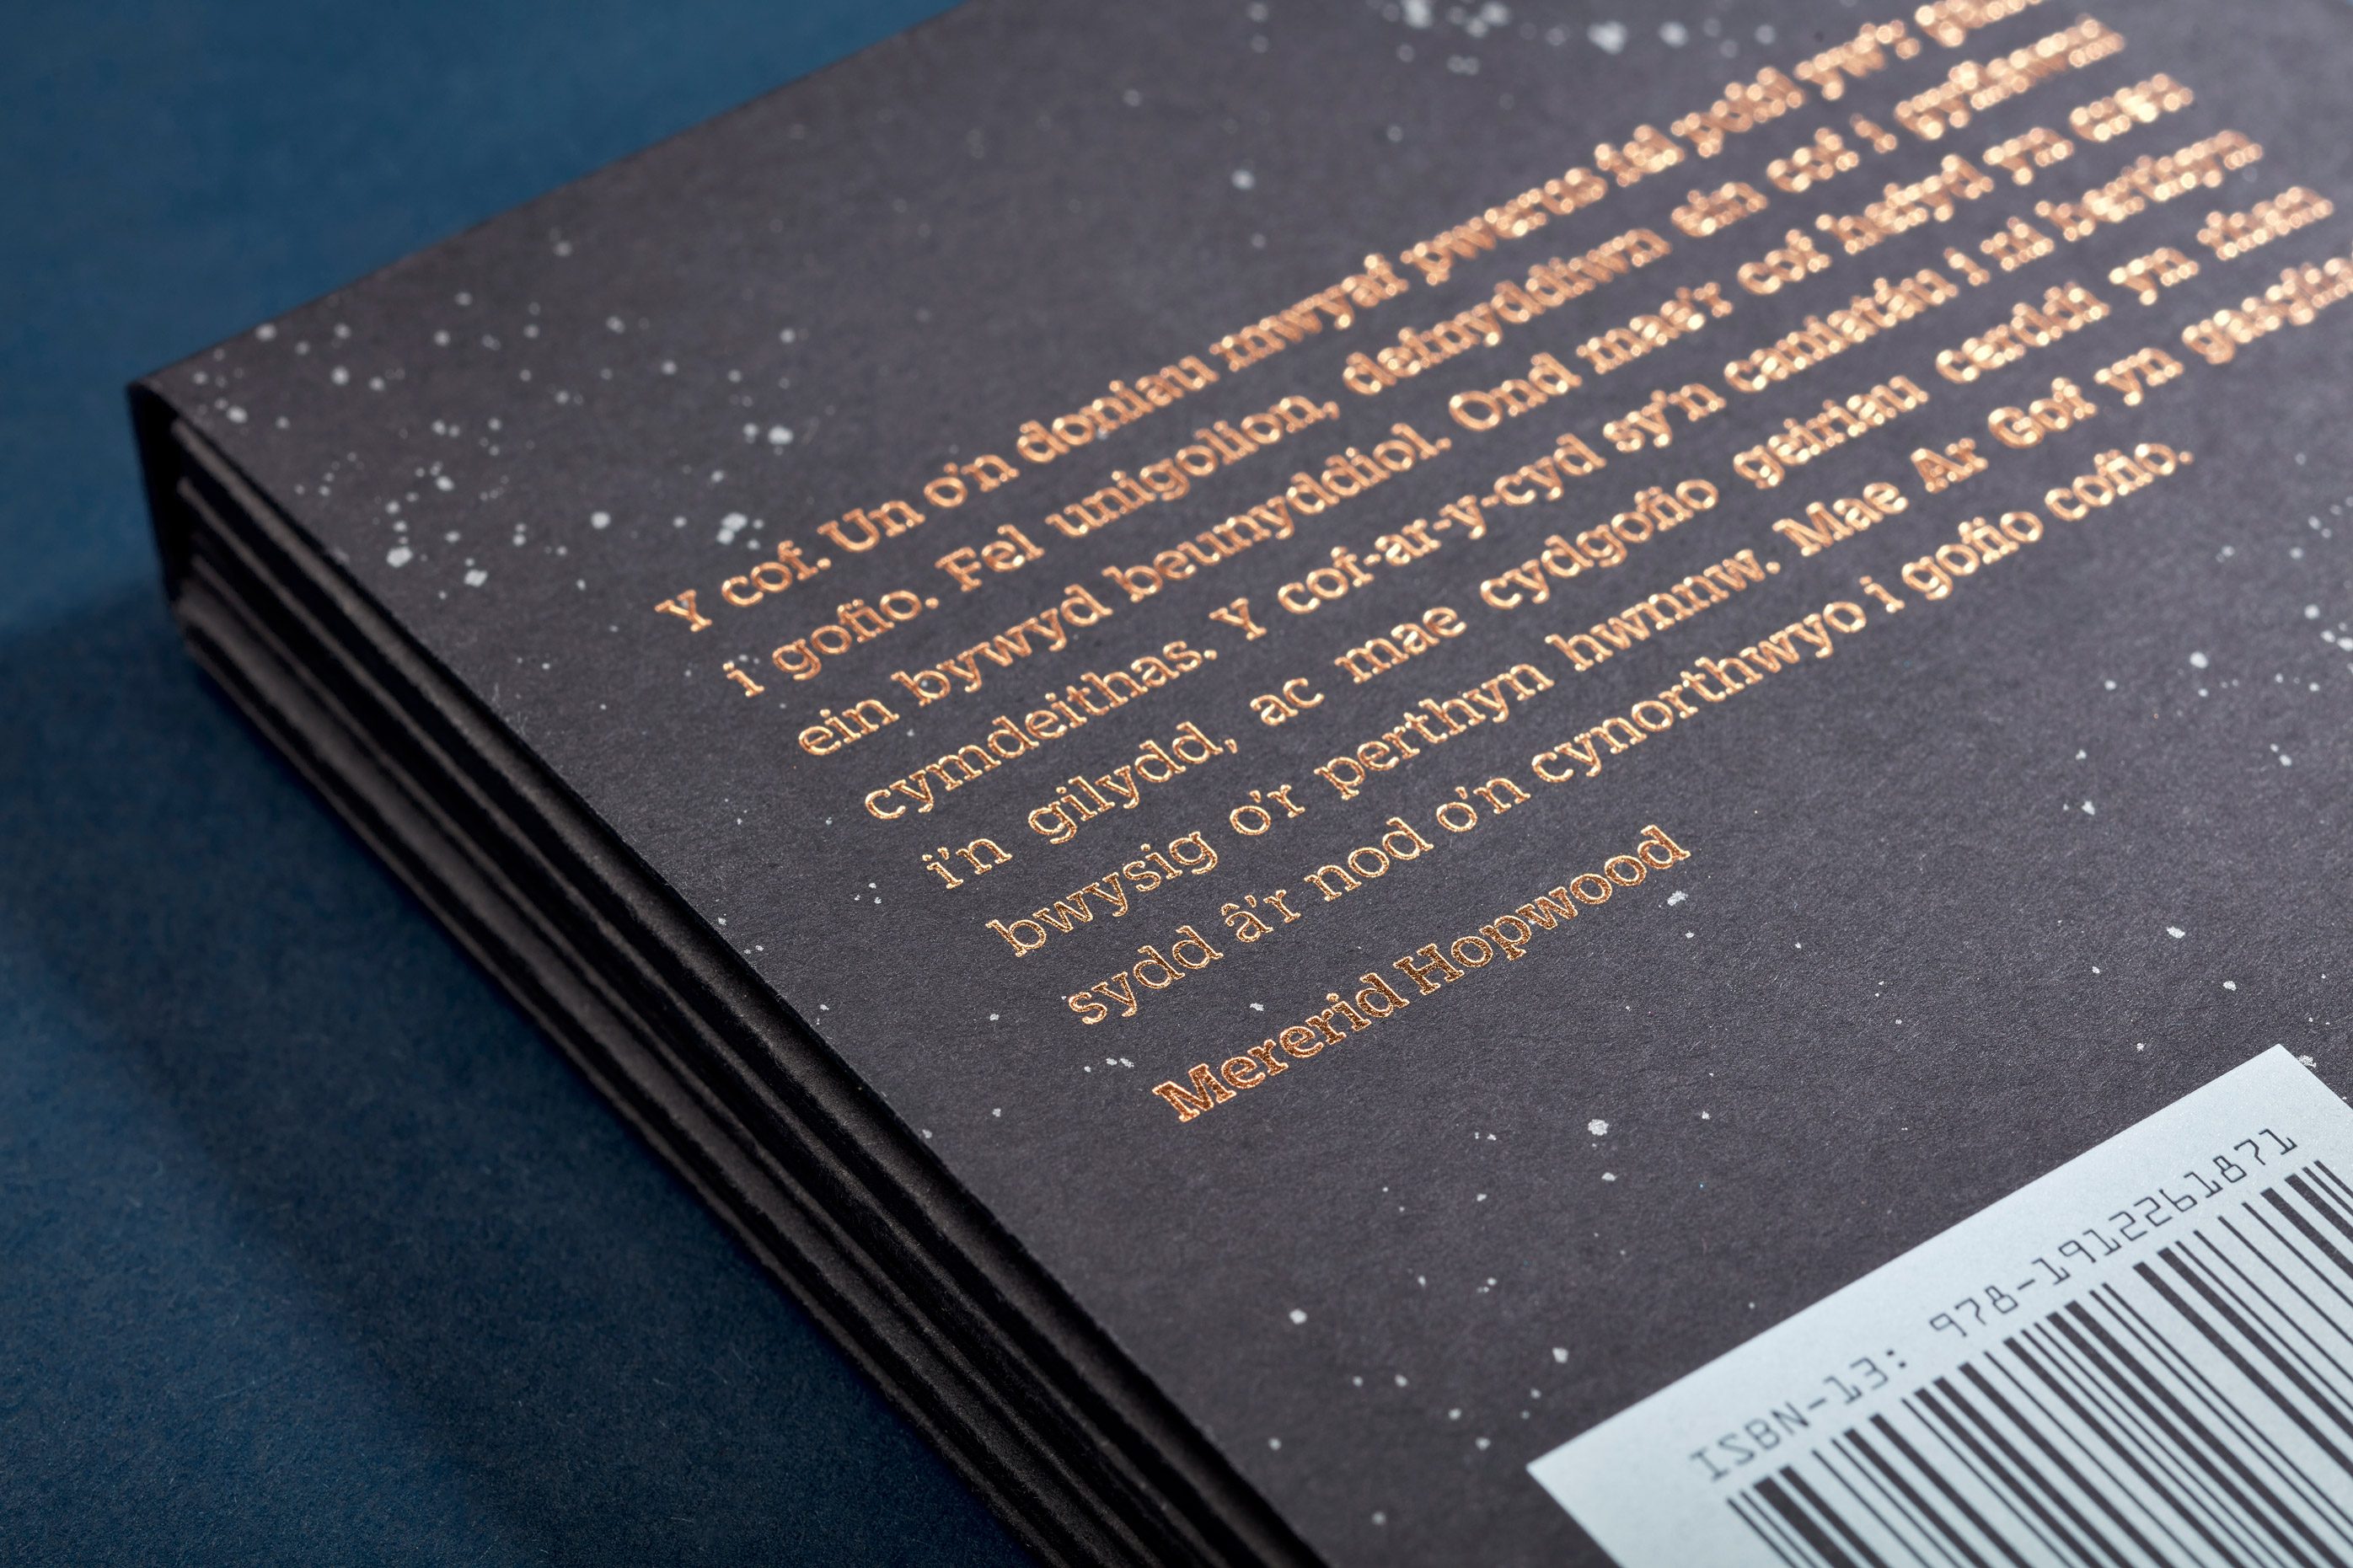 Close-up of foiled lettering on the back of the poetry book box